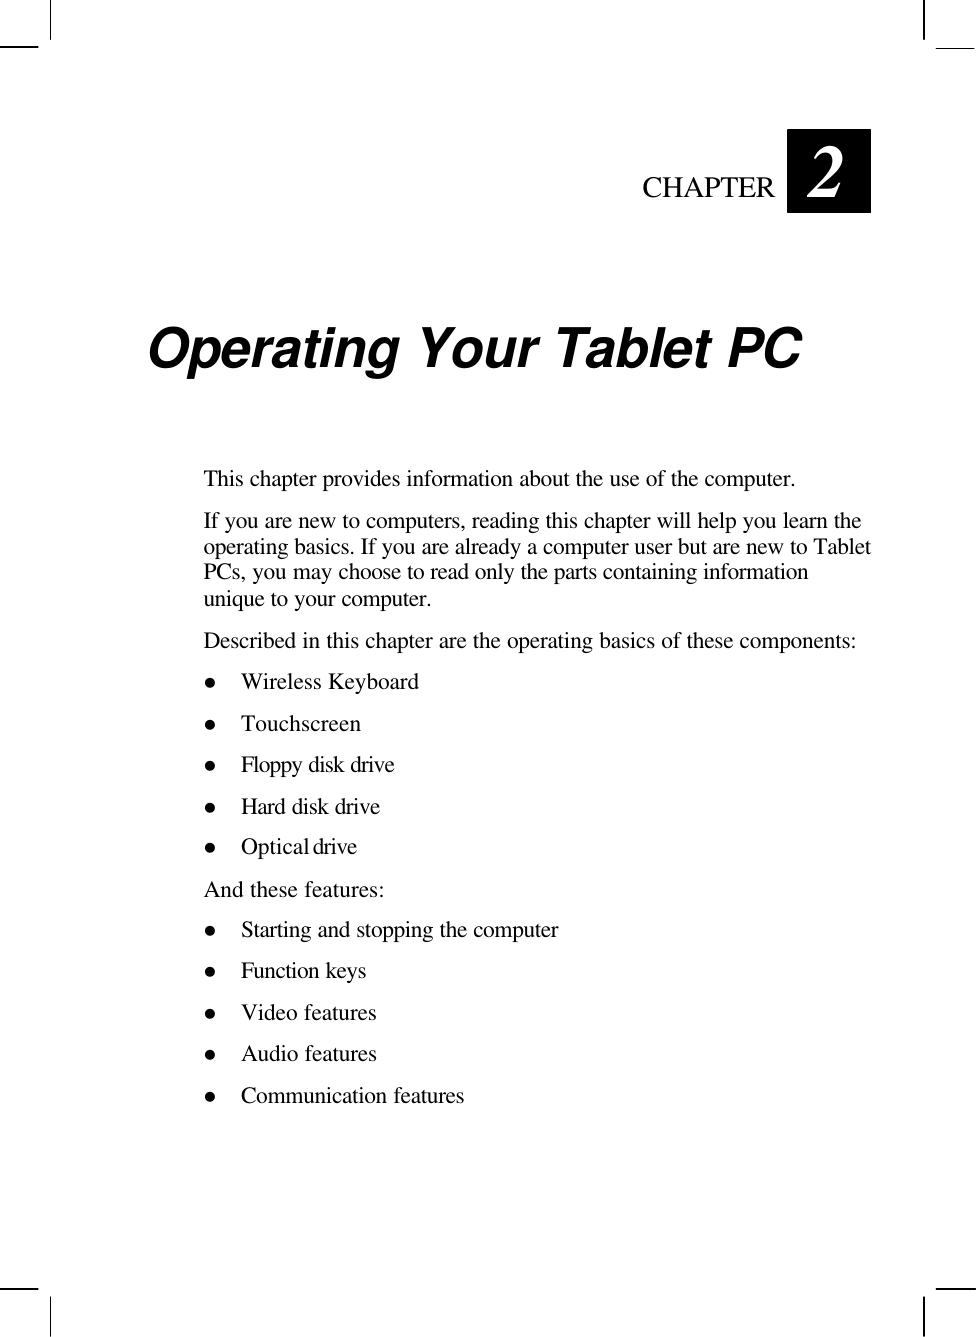   CHAPTER 2 Operating Your Tablet PC This chapter provides information about the use of the computer. If you are new to computers, reading this chapter will help you learn the operating basics. If you are already a computer user but are new to Tablet PCs, you may choose to read only the parts containing information unique to your computer. Described in this chapter are the operating basics of these components: l Wireless Keyboard l Touchscreen l Floppy disk drive l Hard disk drive l Optical drive And these features: l Starting and stopping the computer l Function keys l Video features l Audio features l Communication features  